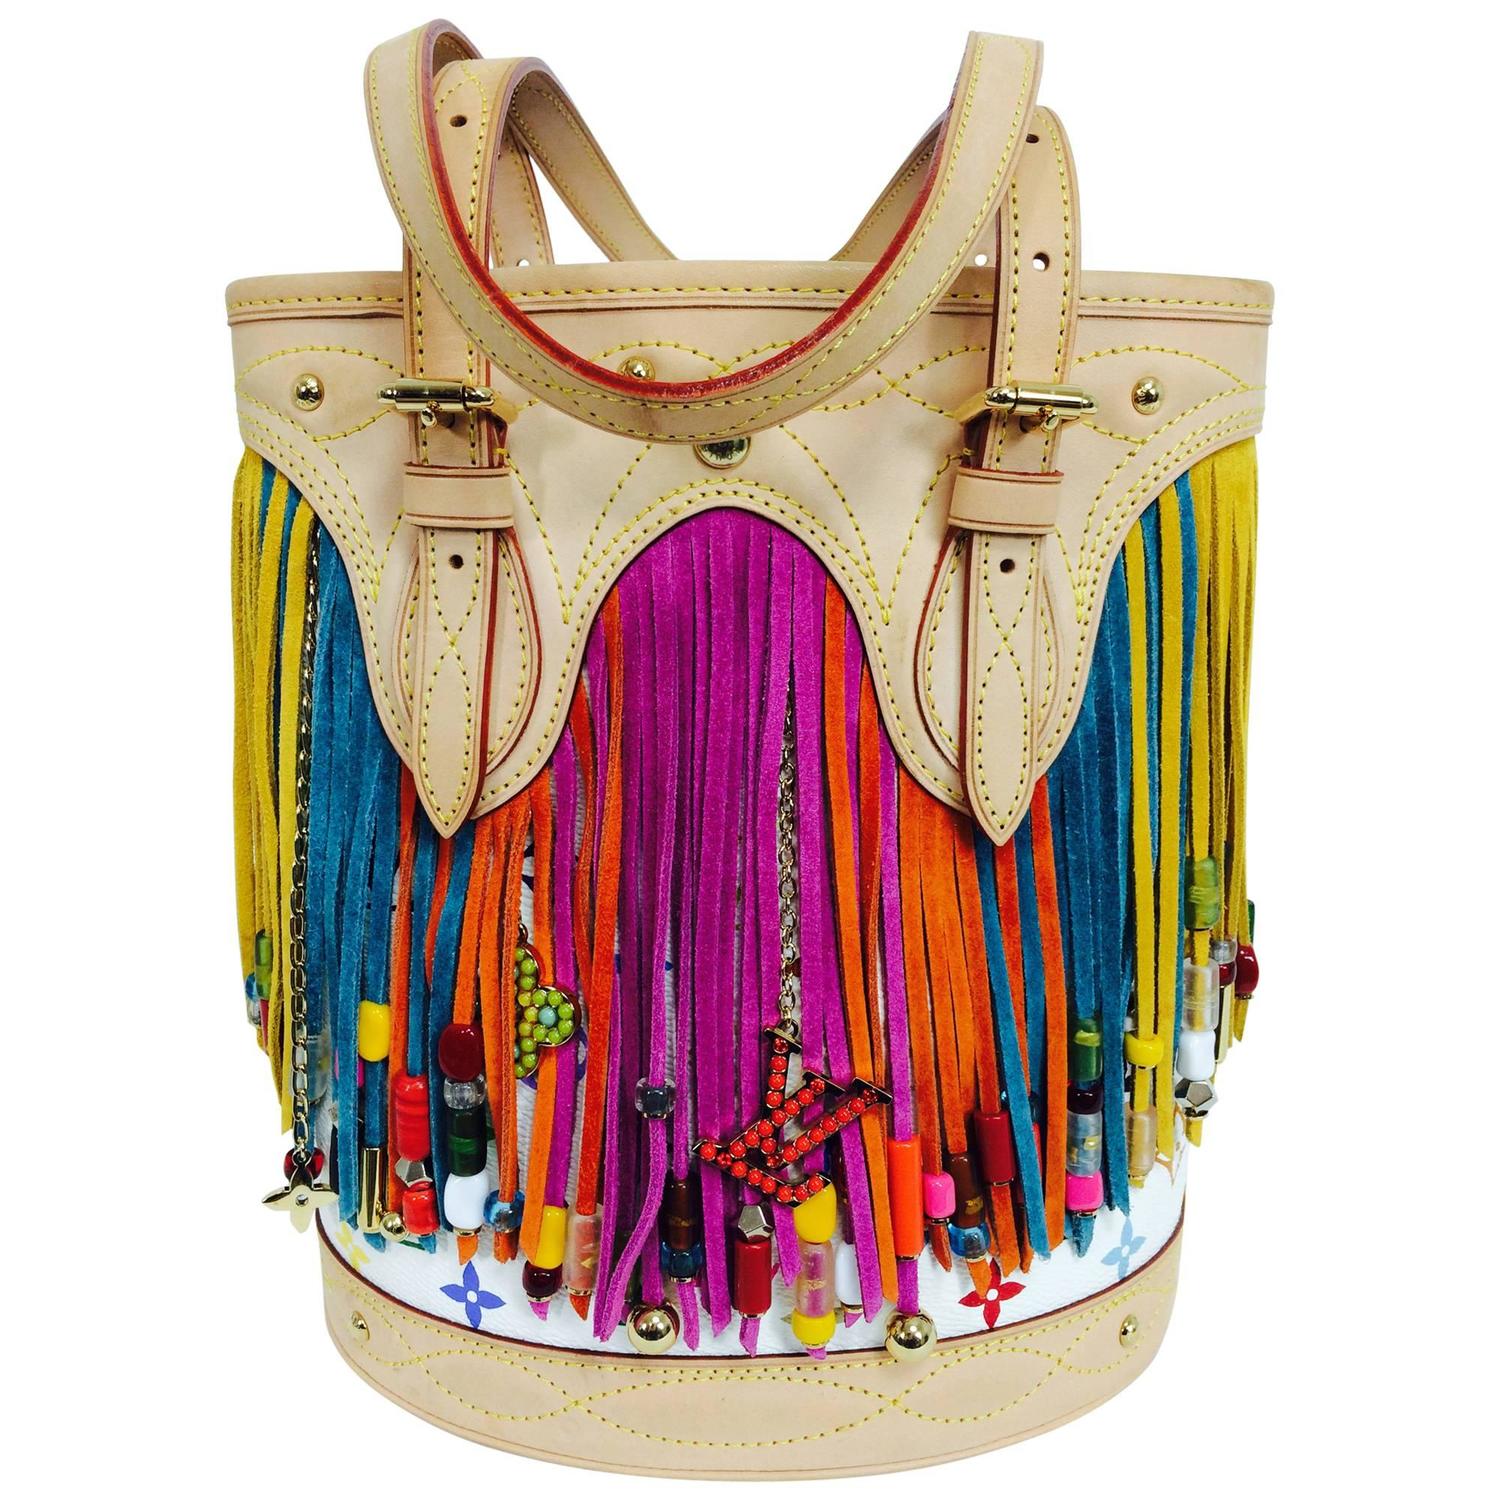 Louis Vuitton Multicolore Fringe Bucket Bag designed by Takashi Murakami 2006 For Sale at 1stdibs